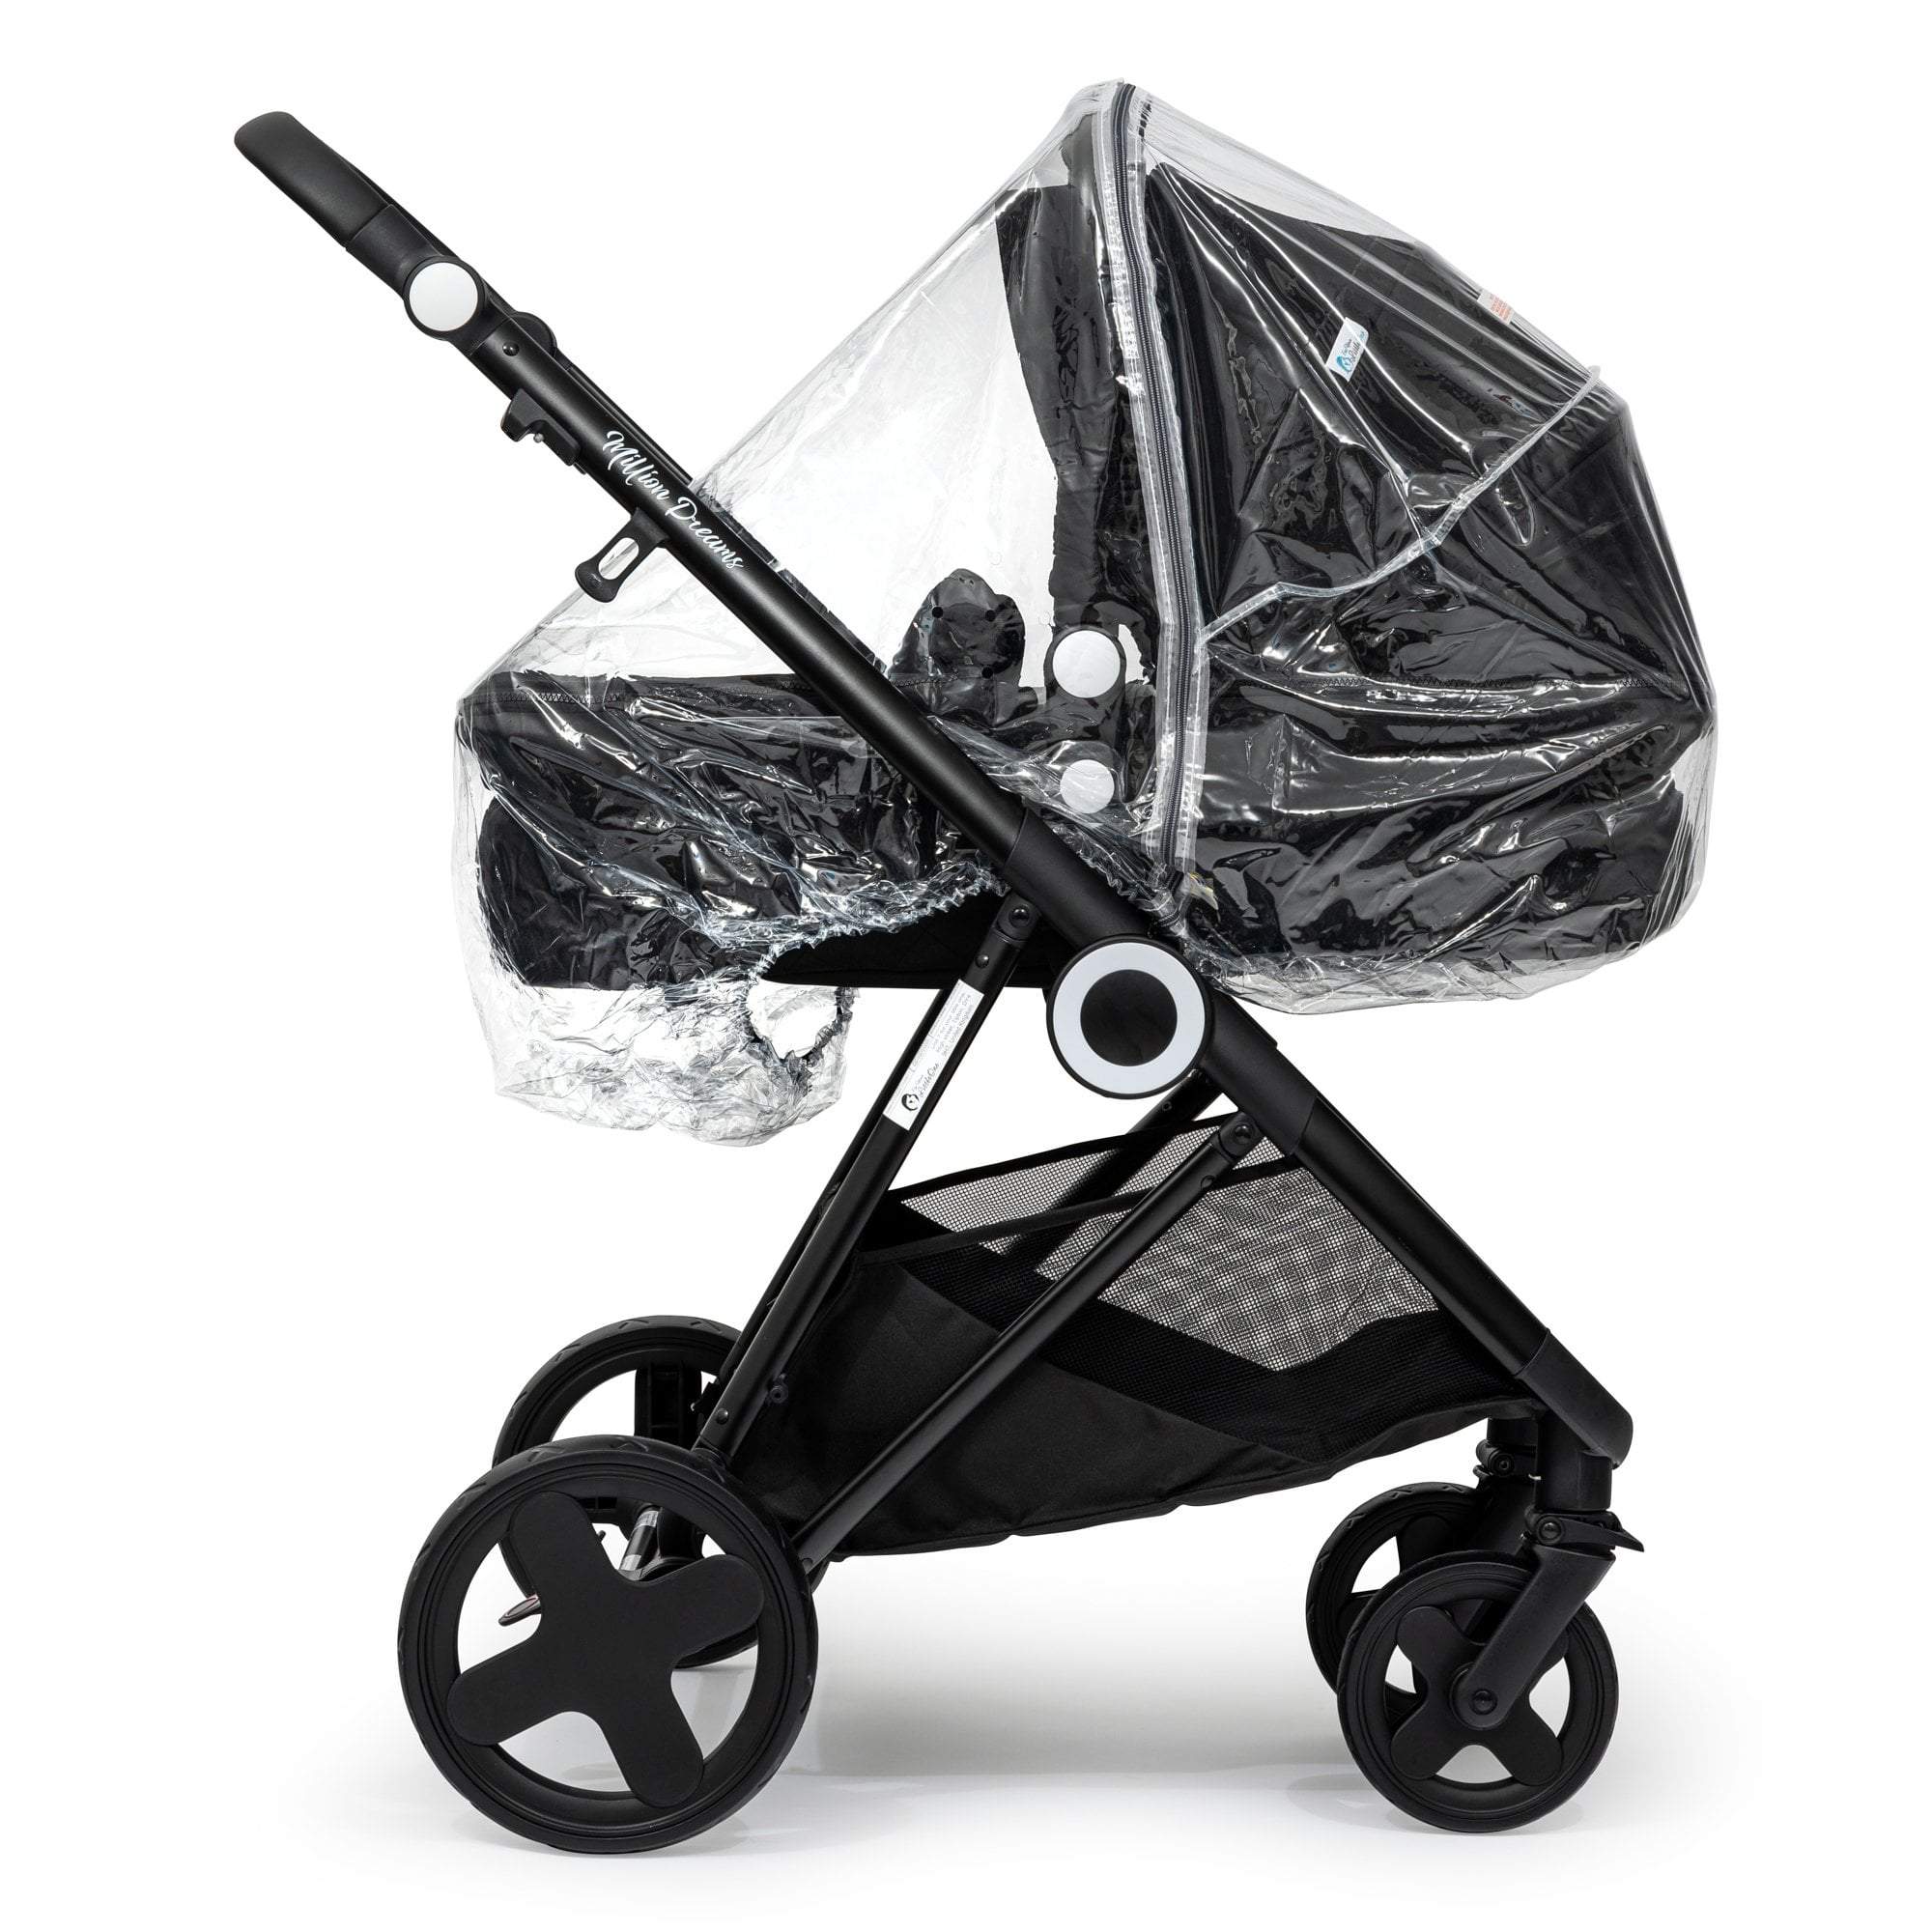 Carrycot Raincover Compatible With Stokke - Fits All Models - For Your Little One